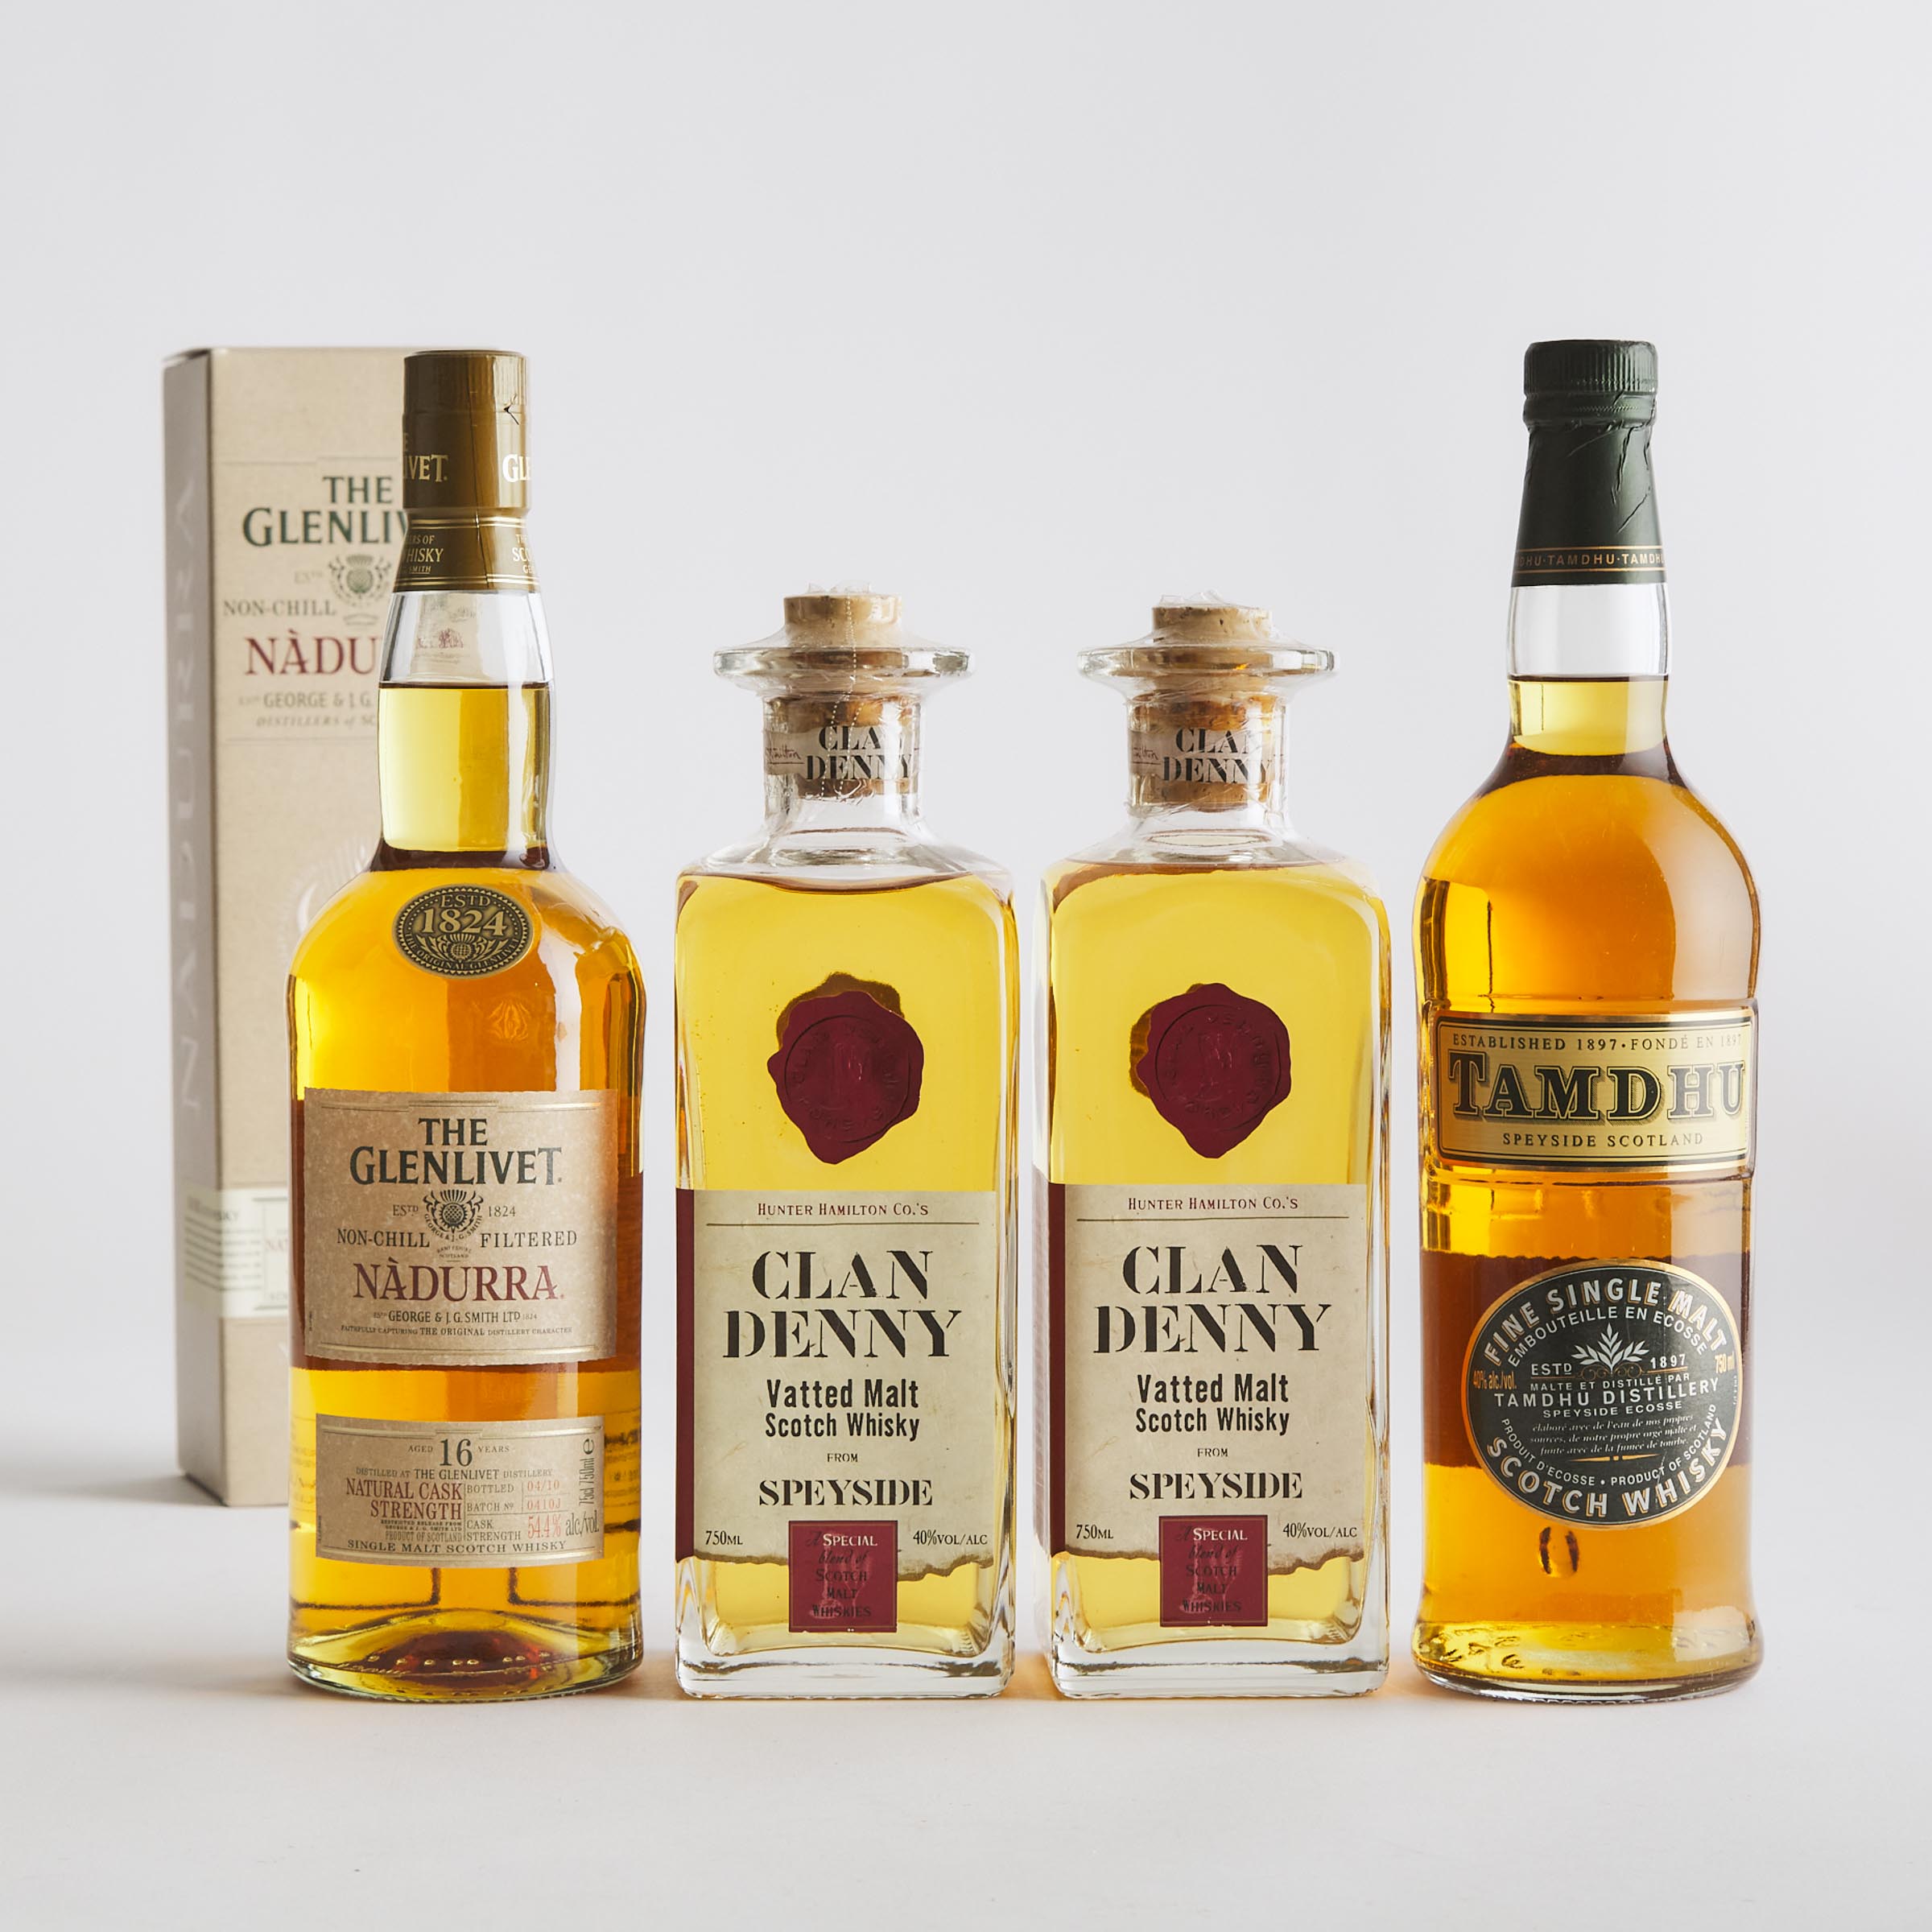 CLAN DENNY VATTED MALT SCOTCH WHISKY NAS (TWO 750 ML)
TAMDHU SINGLE MALT SCOTCH WHISKY NAS (ONE 750 ML)
THE GLENLIVET NÀDURRA SINGLE MALT SCOTCH WHISKY 16 YEARS (ONE 750 ML)